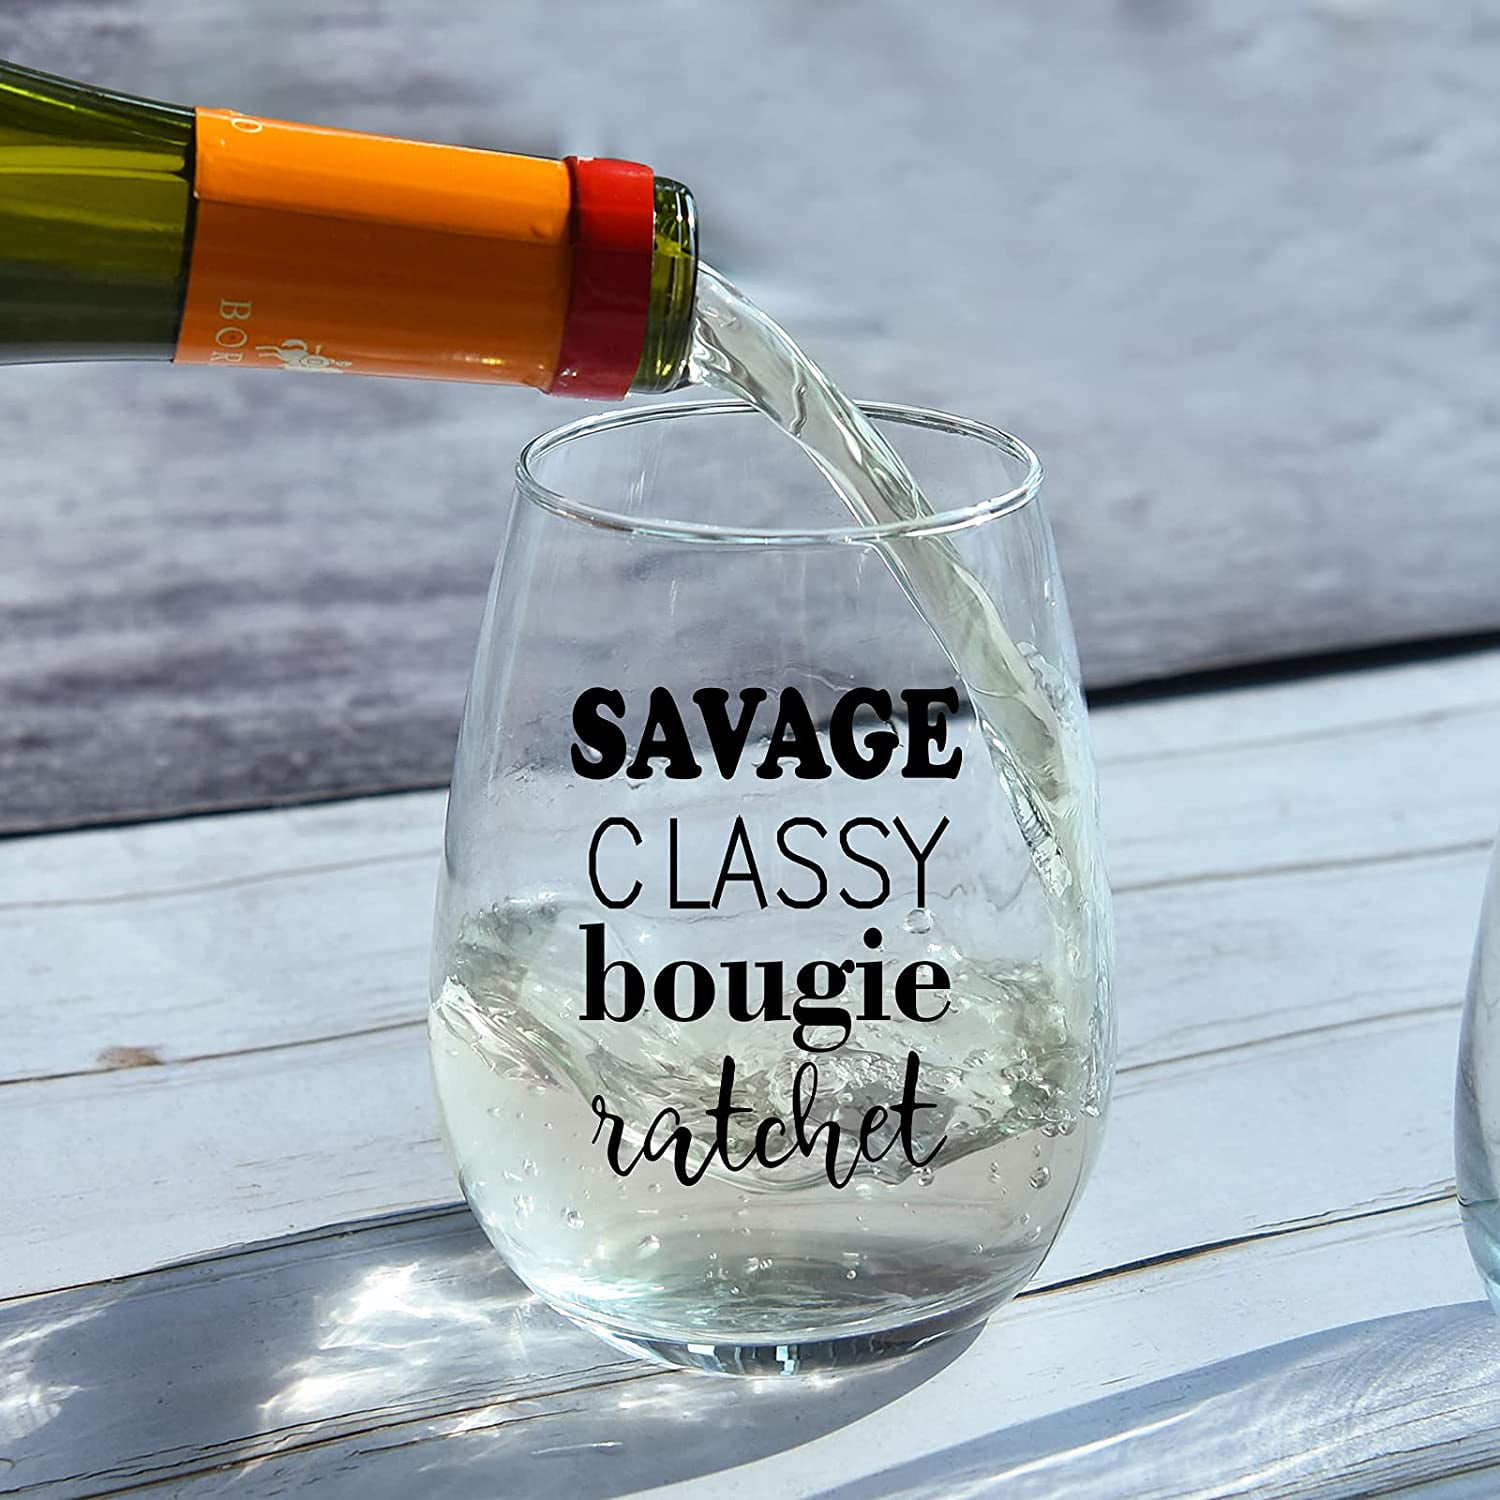 Best Friend Savage Classy Bougie Ratchet Funny Wine Glass Gifts for Women Sister Unique Birthday Gift for Woman Friends 17 oz Stemless Wine Glasses Cute BFF Wine glasses Present for Her 